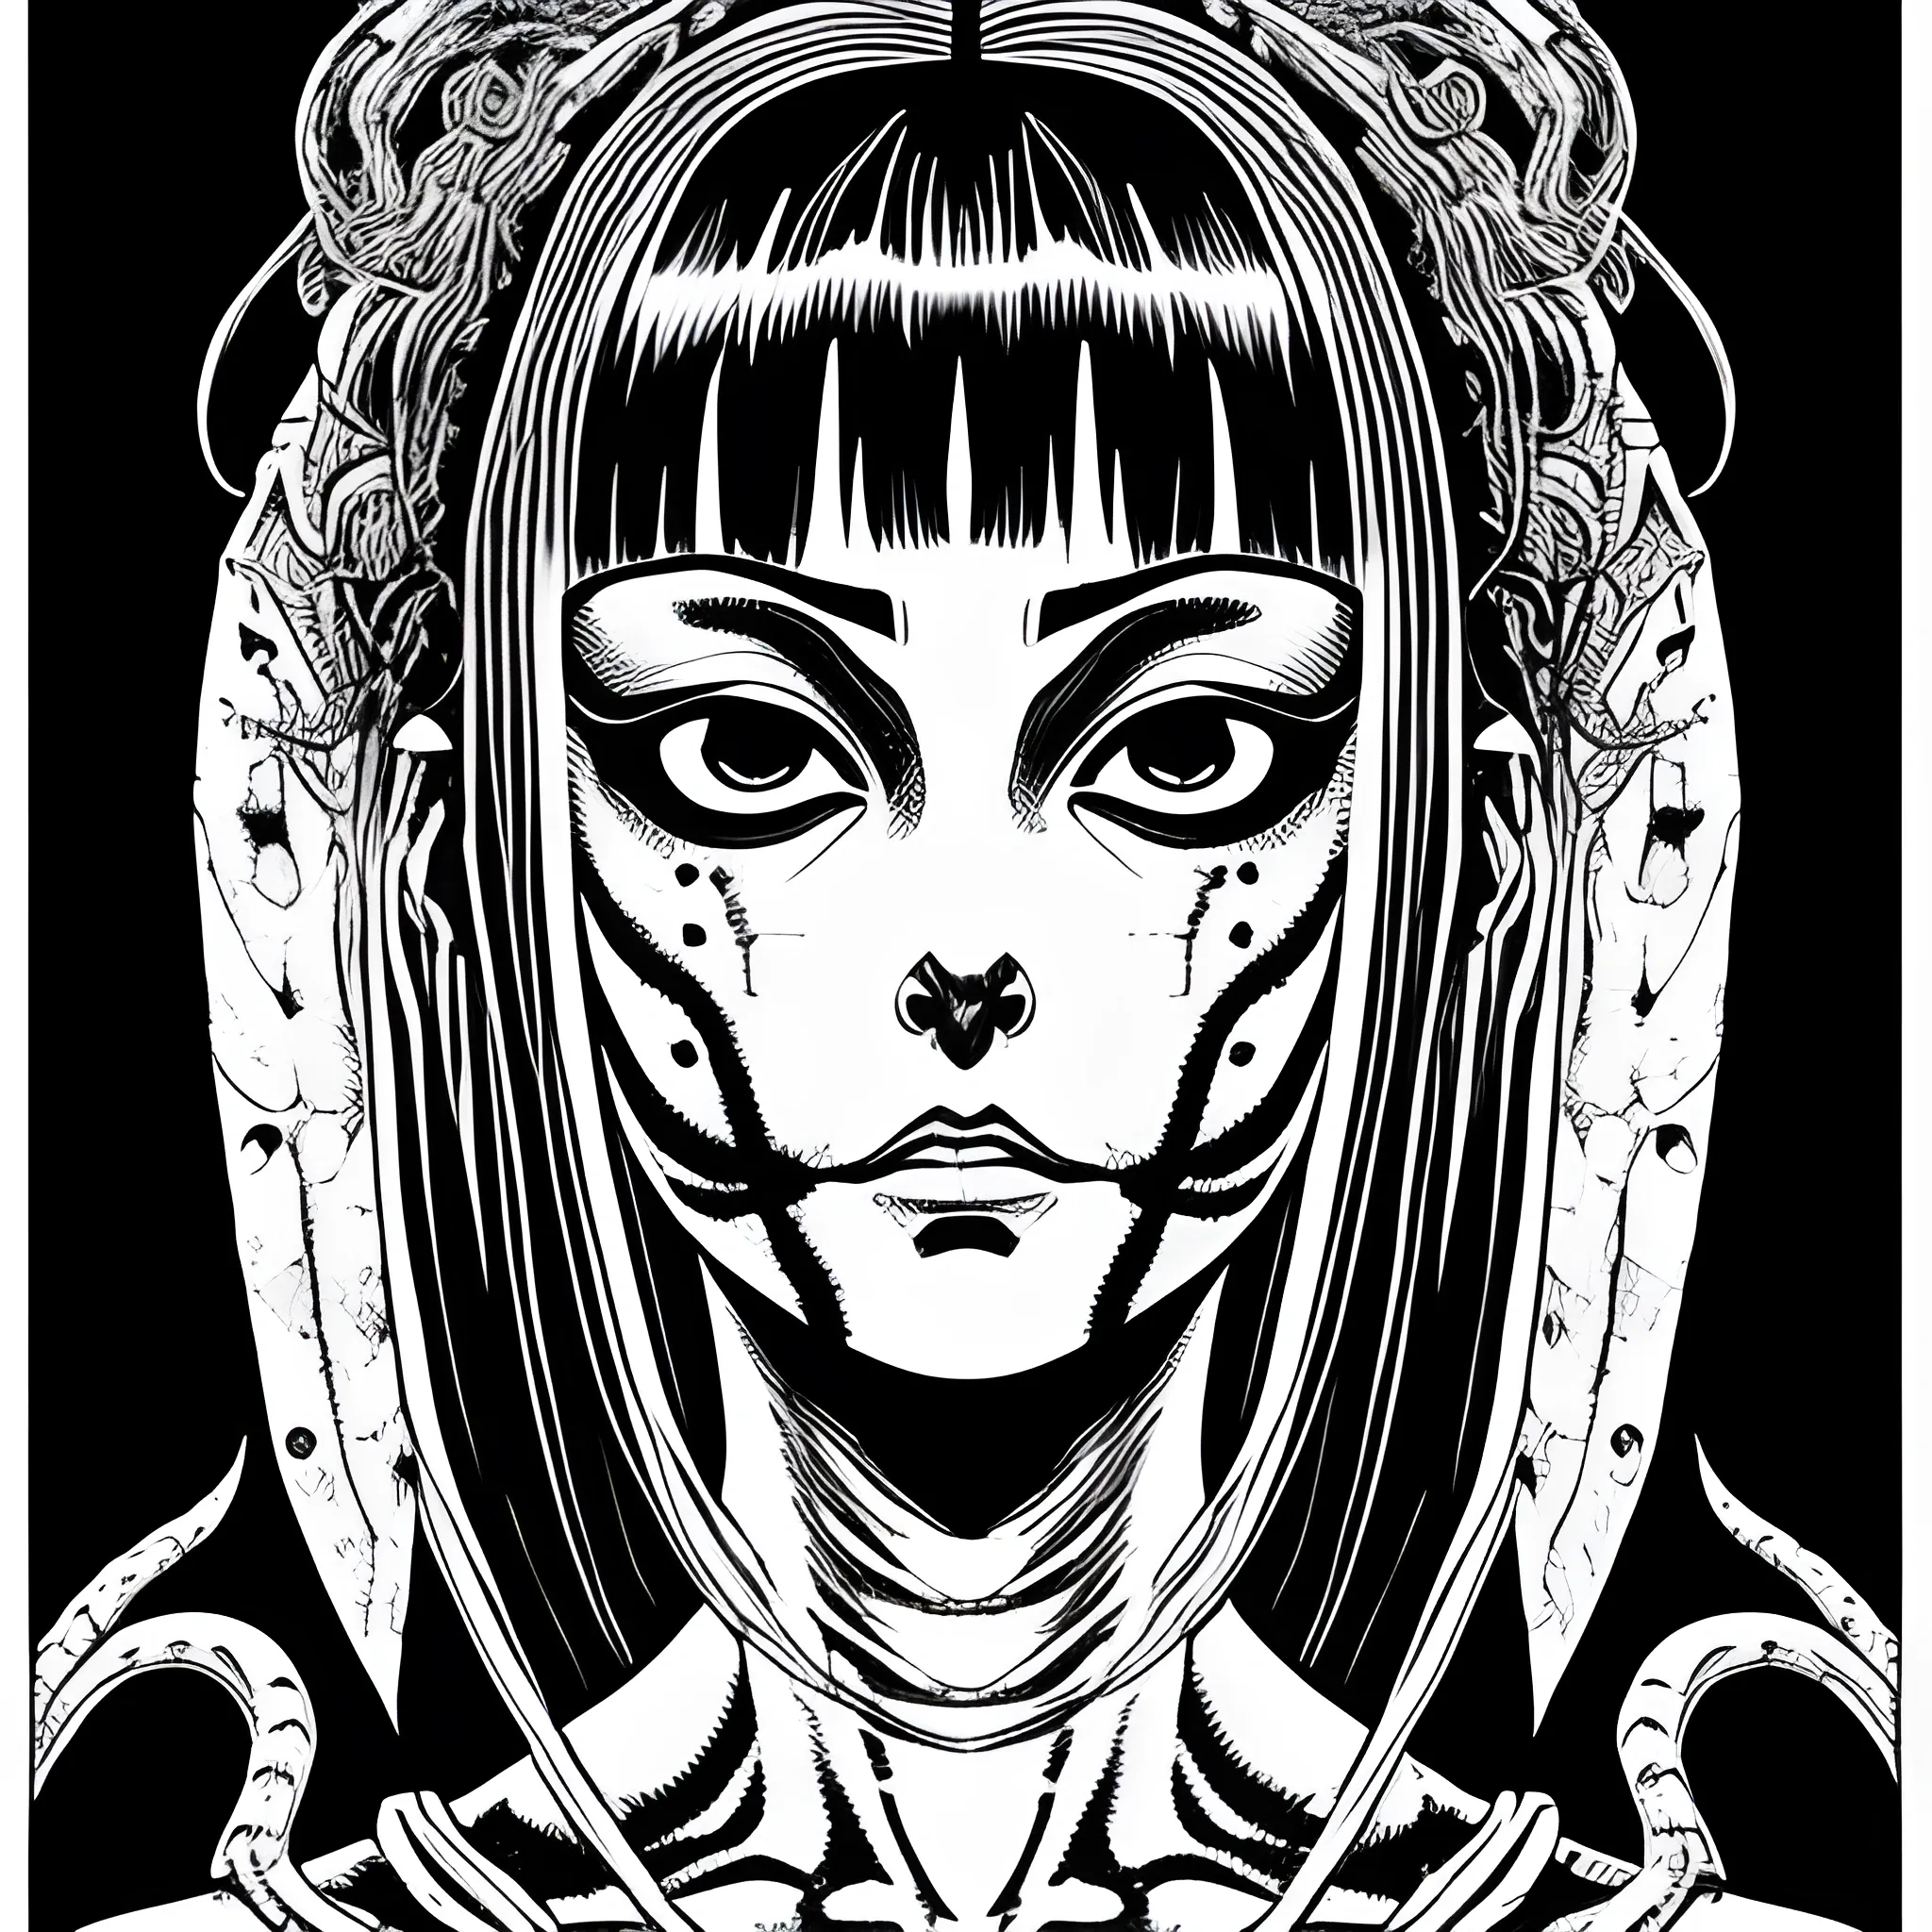 Portrait of Cleopatra surrounded by shadows and monsters, eerie and haunted atmosphere, in Junji Ito style, horror manga, black and white inked, detailed, sharp focus, trending on ArtStation, by Junji Ito, Ally Burke, Laurie Greasley, and Chet Zar. The portrait is highly detailed and intricate, with a dark and unsettling atmosphere that captures the essence of Junji Ito's horror manga. The use of black and white inked lines creates a stark contrast that adds to the chilling feeling of the portrait. A must-see for fans of Junji Ito's work.